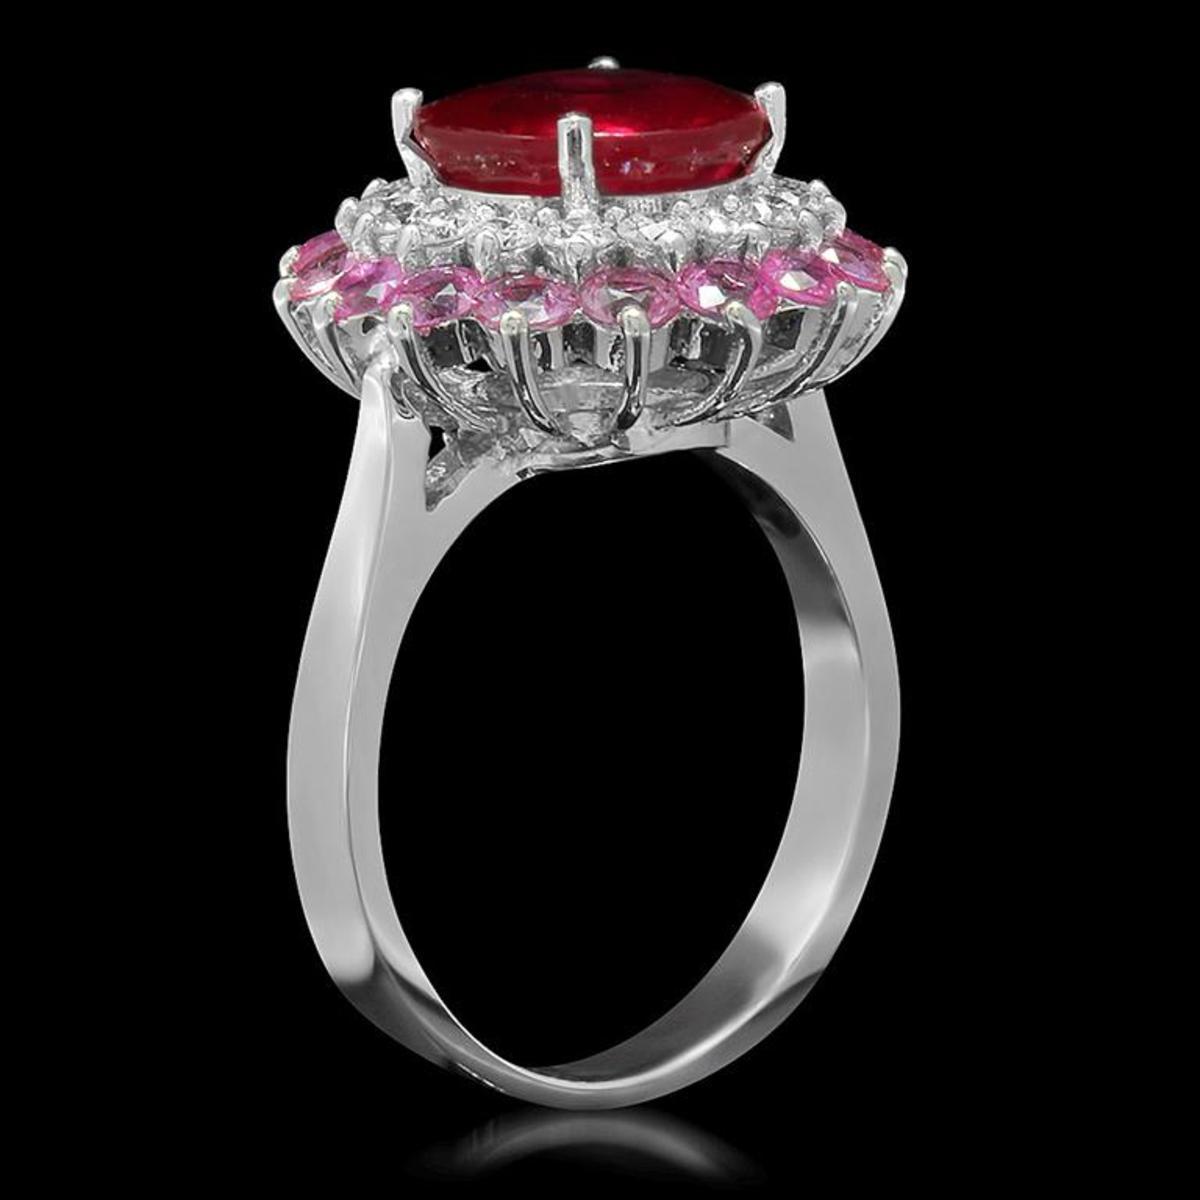 14K White Gold 3.0ct Ruby 2.13ct Sapphire and 0.58ct Diamond Ring